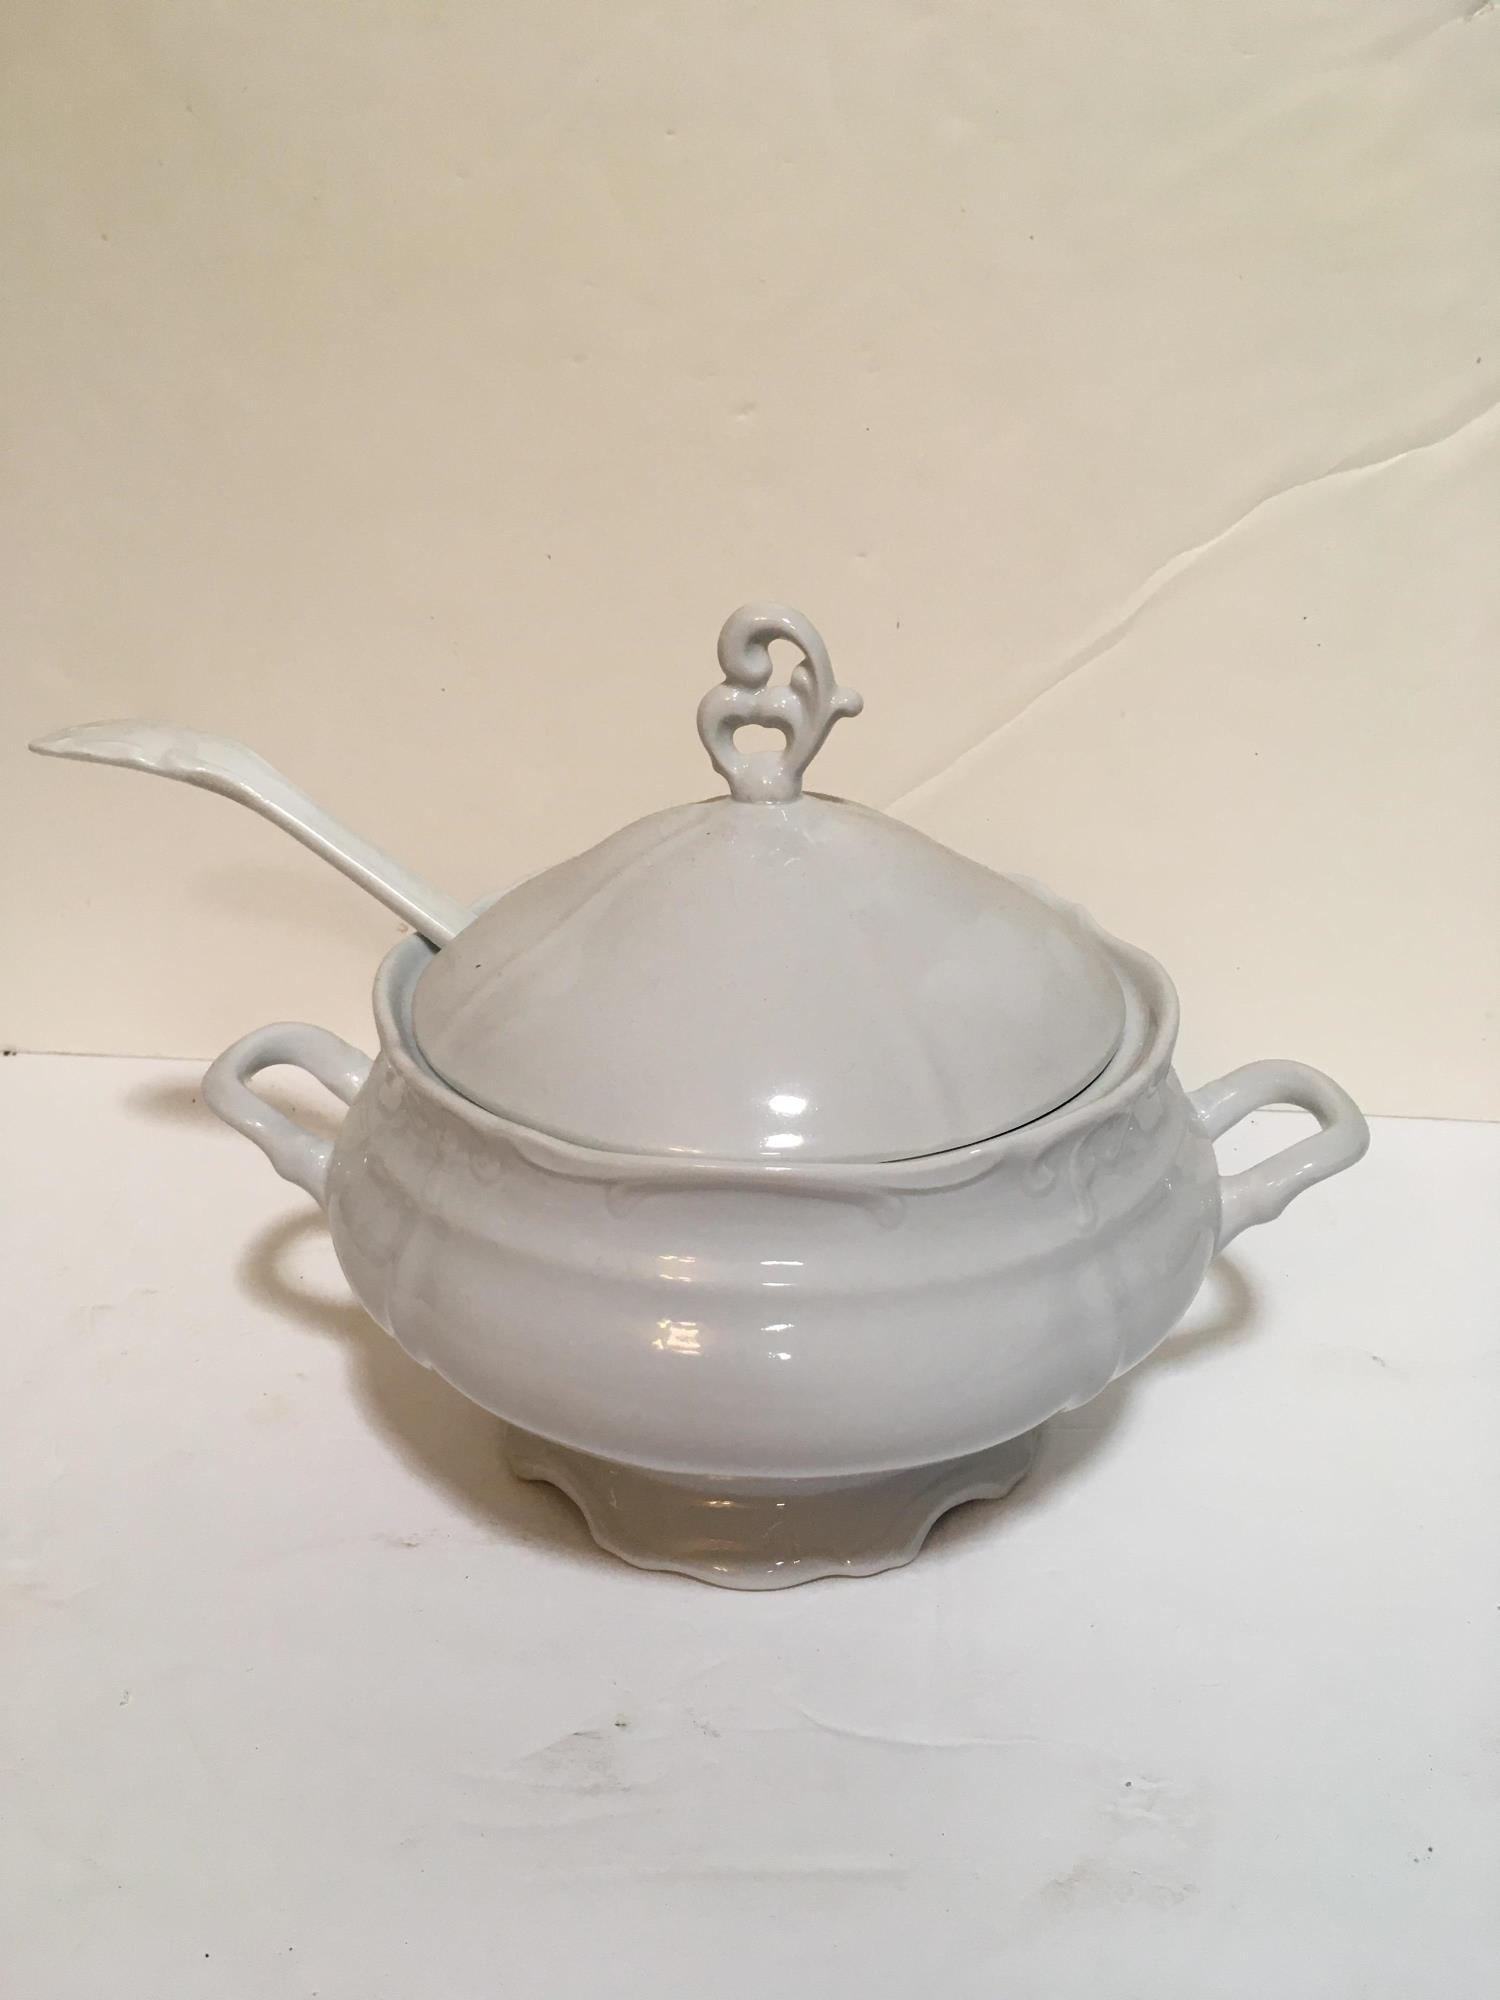 WHITE PORCELAIN LIDDED SOUP TUREEN WITH LADLE